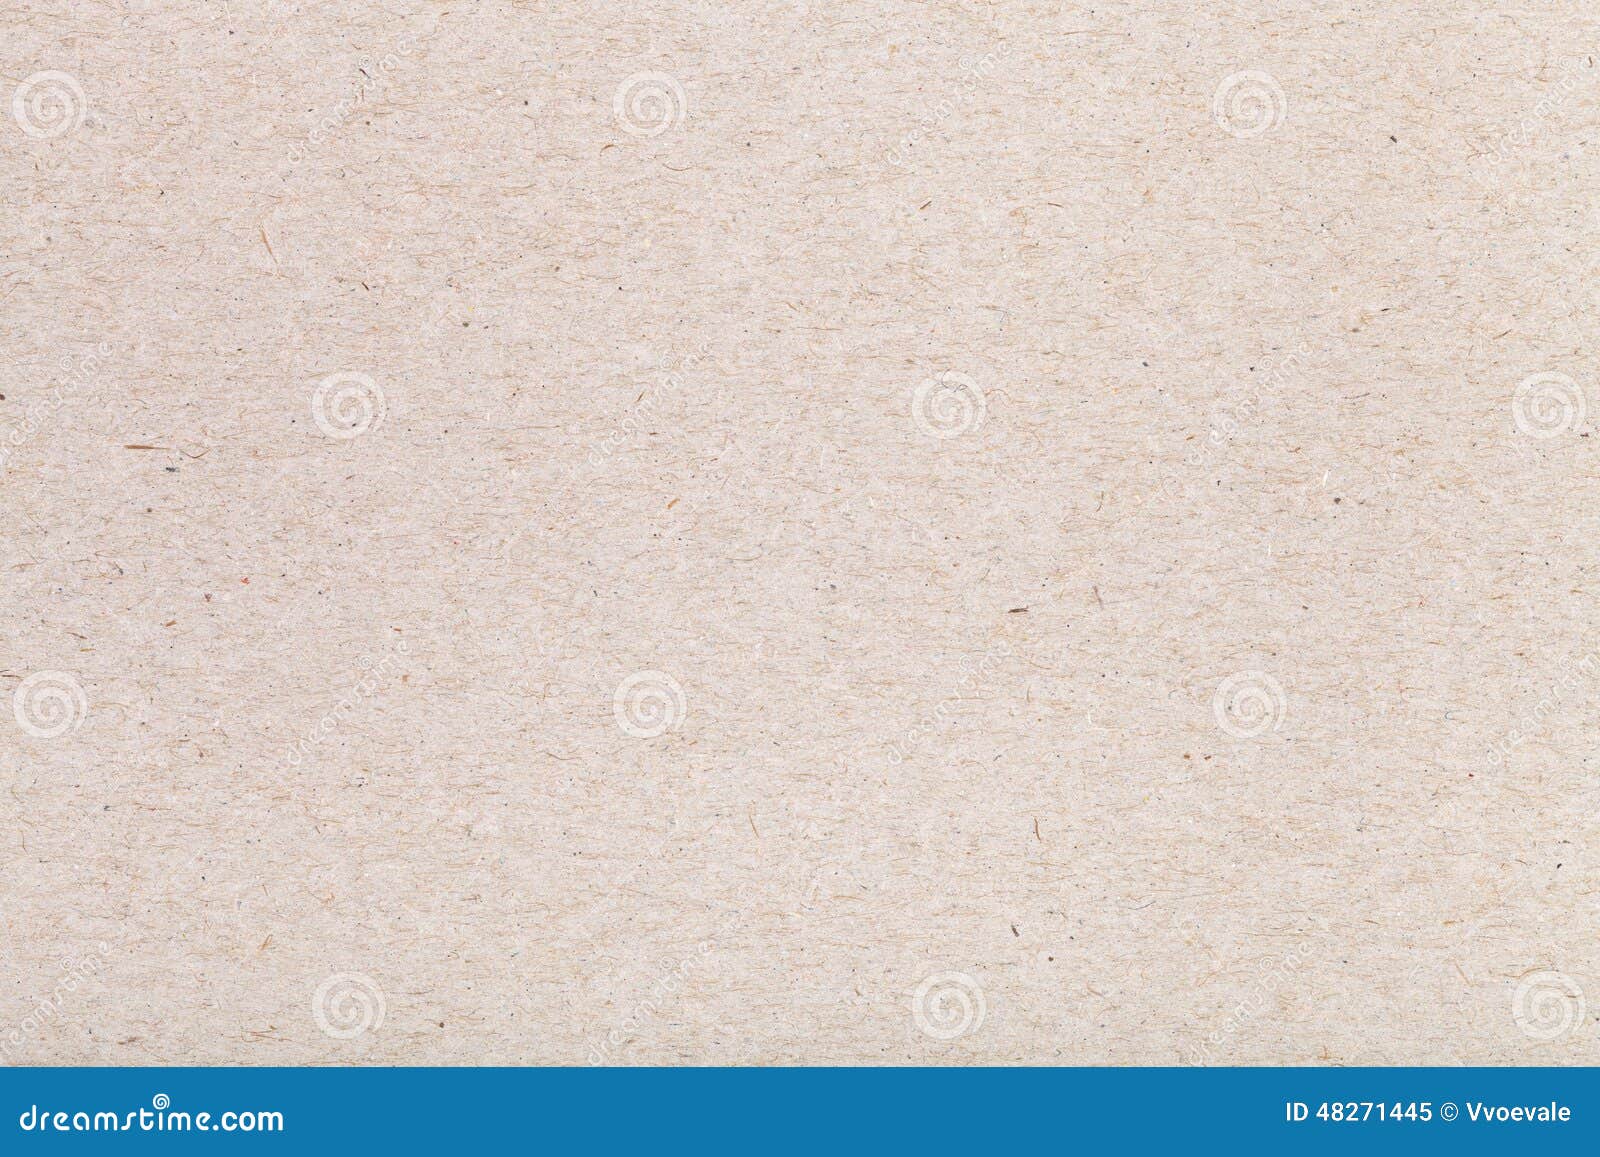 105,128 Cardboard Sheet Stock Photos - Free & Royalty-Free Stock Photos  from Dreamstime